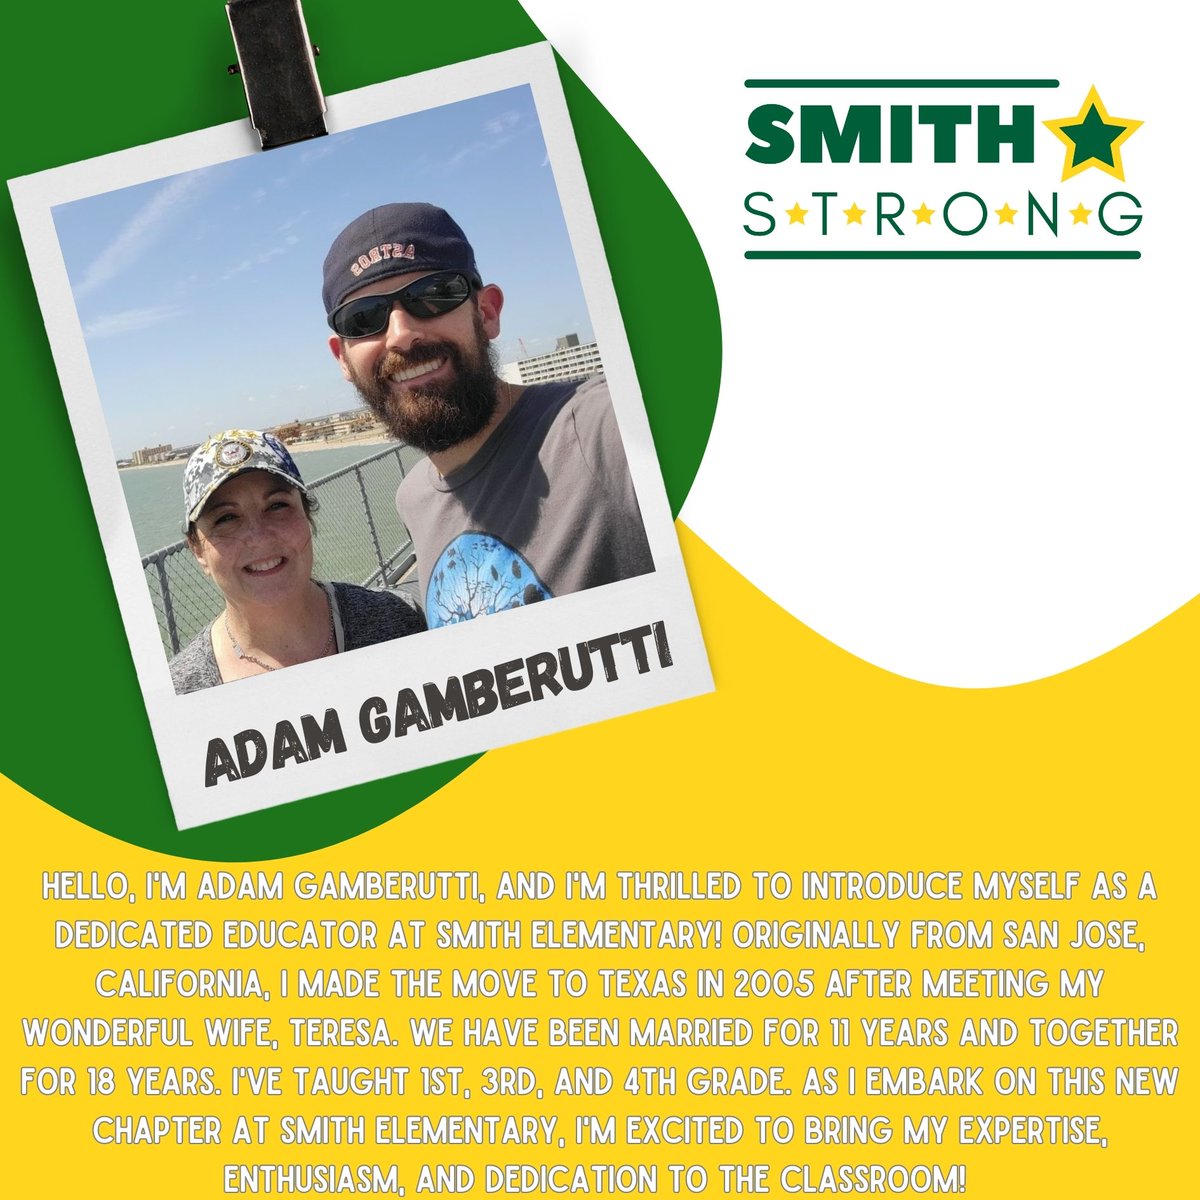 #SMITHSTRONG💪, help us welcome Adam Gamberutti to Smith Elementary! He will be joining our 4th-grade team here at Smith Elementary!💪💚⭐️